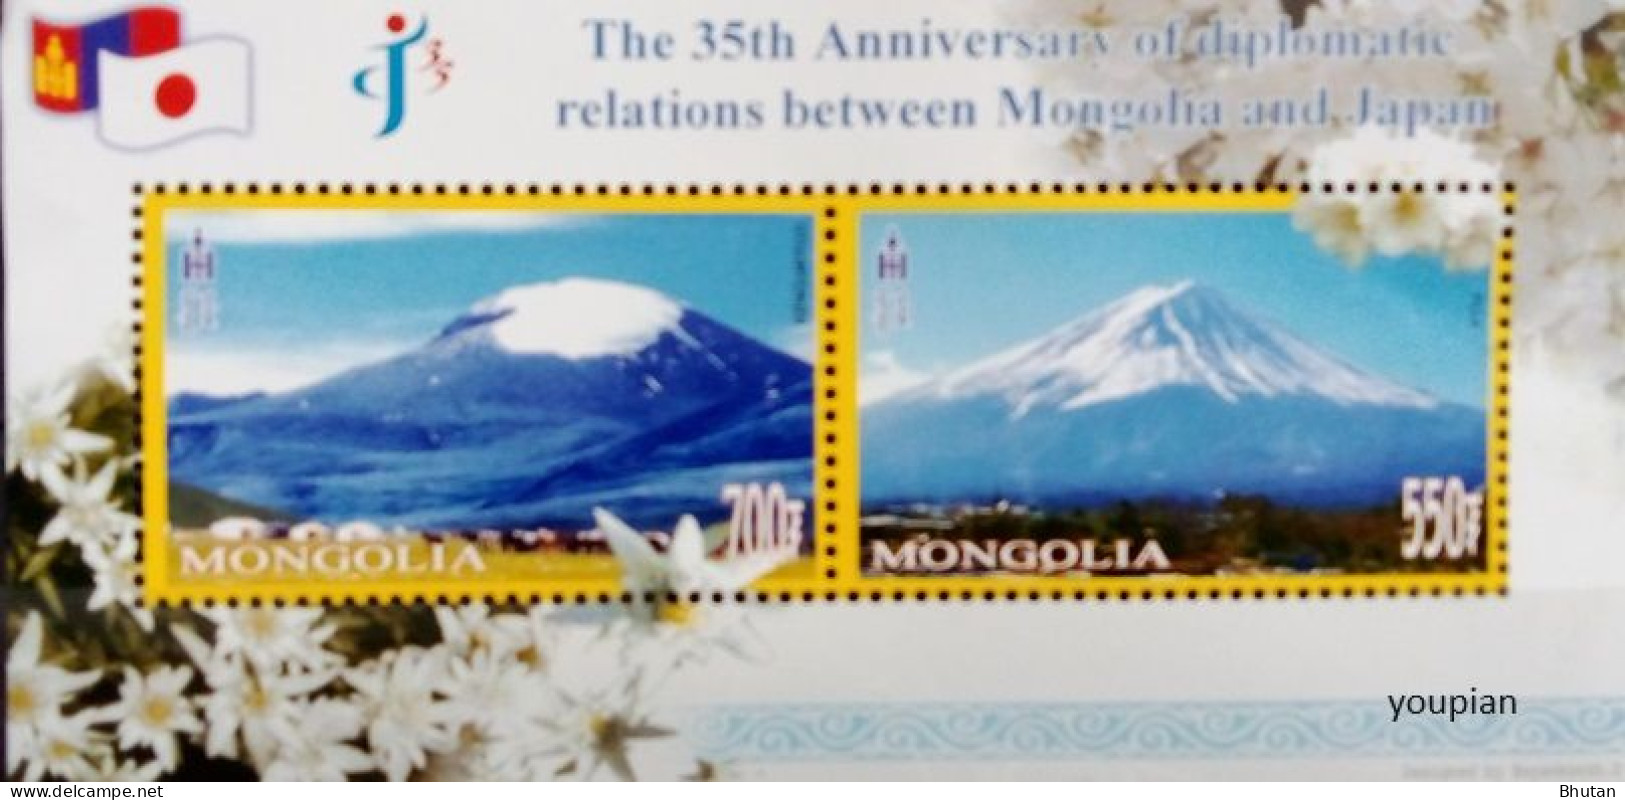 Mongolia 2007, 35 Years Of Diplomatic Relations With Japan - Mountains, MNH S/S - Mongolie